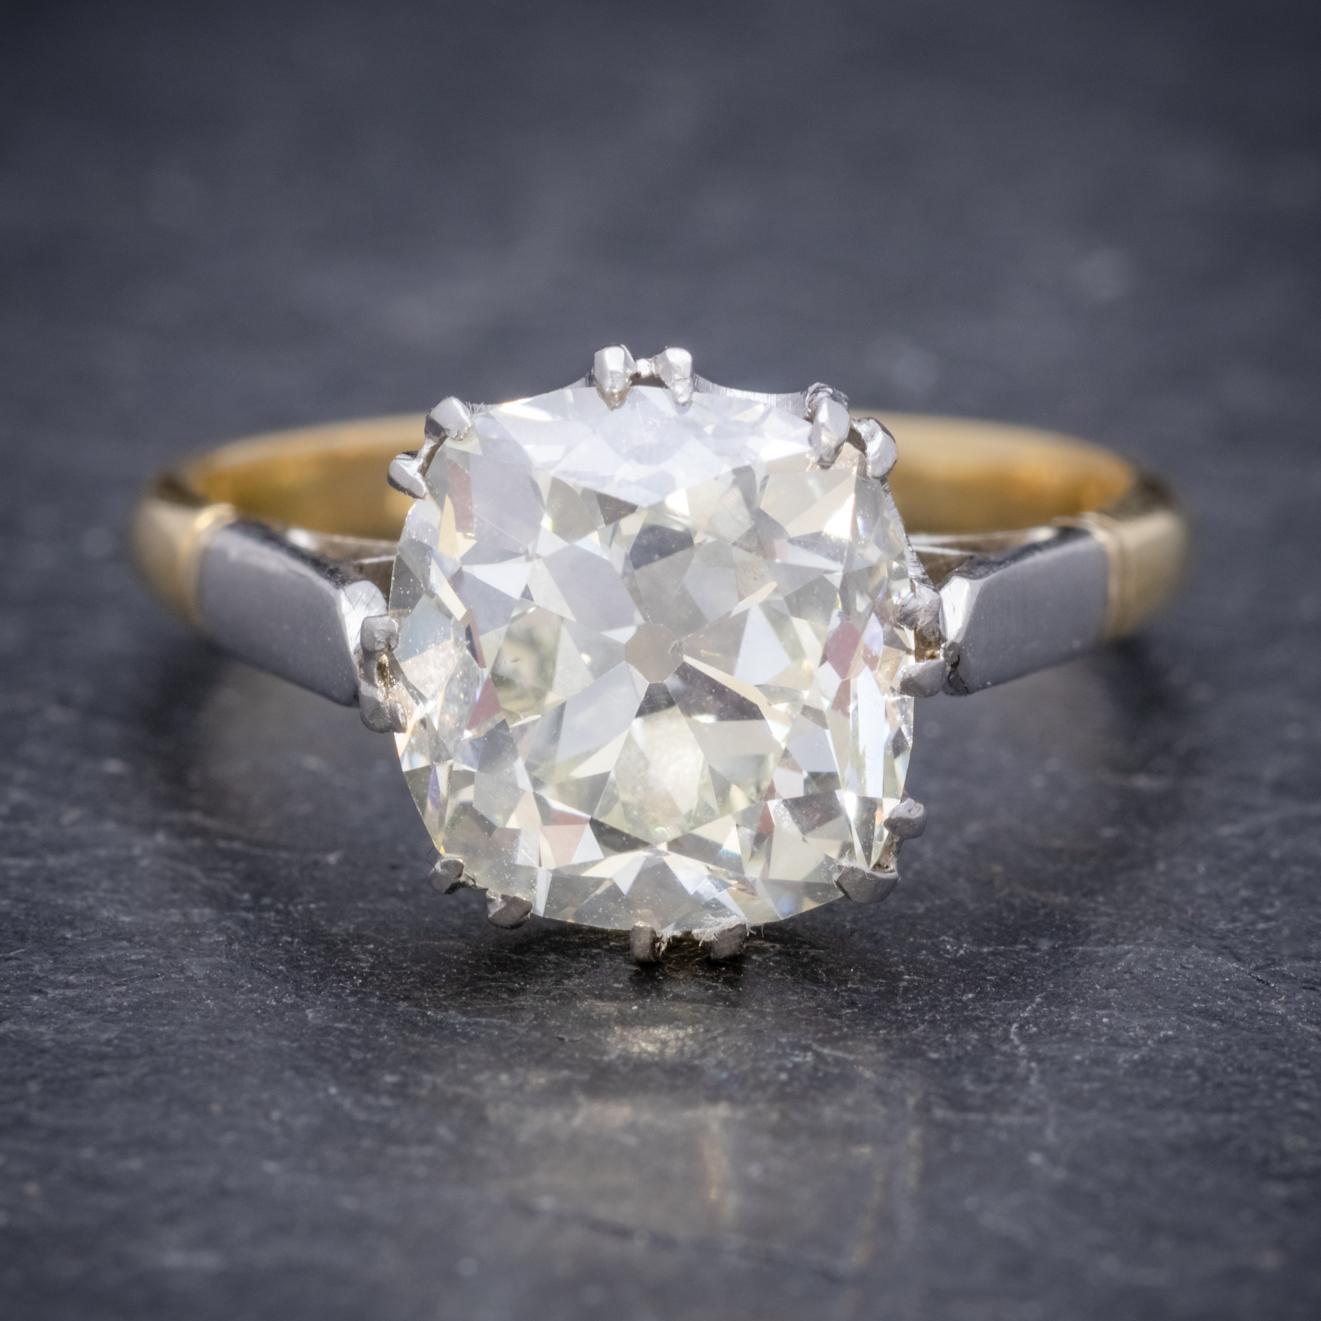 A magnificent antique Edwardian solitaire ring adorned with a stunning old cushion cut Diamond which has been weighed at 3.88ct and sparkles beautifully in the light. 

The stone is claw set in a lovely Platinum mount with 18ct Yellow Gold